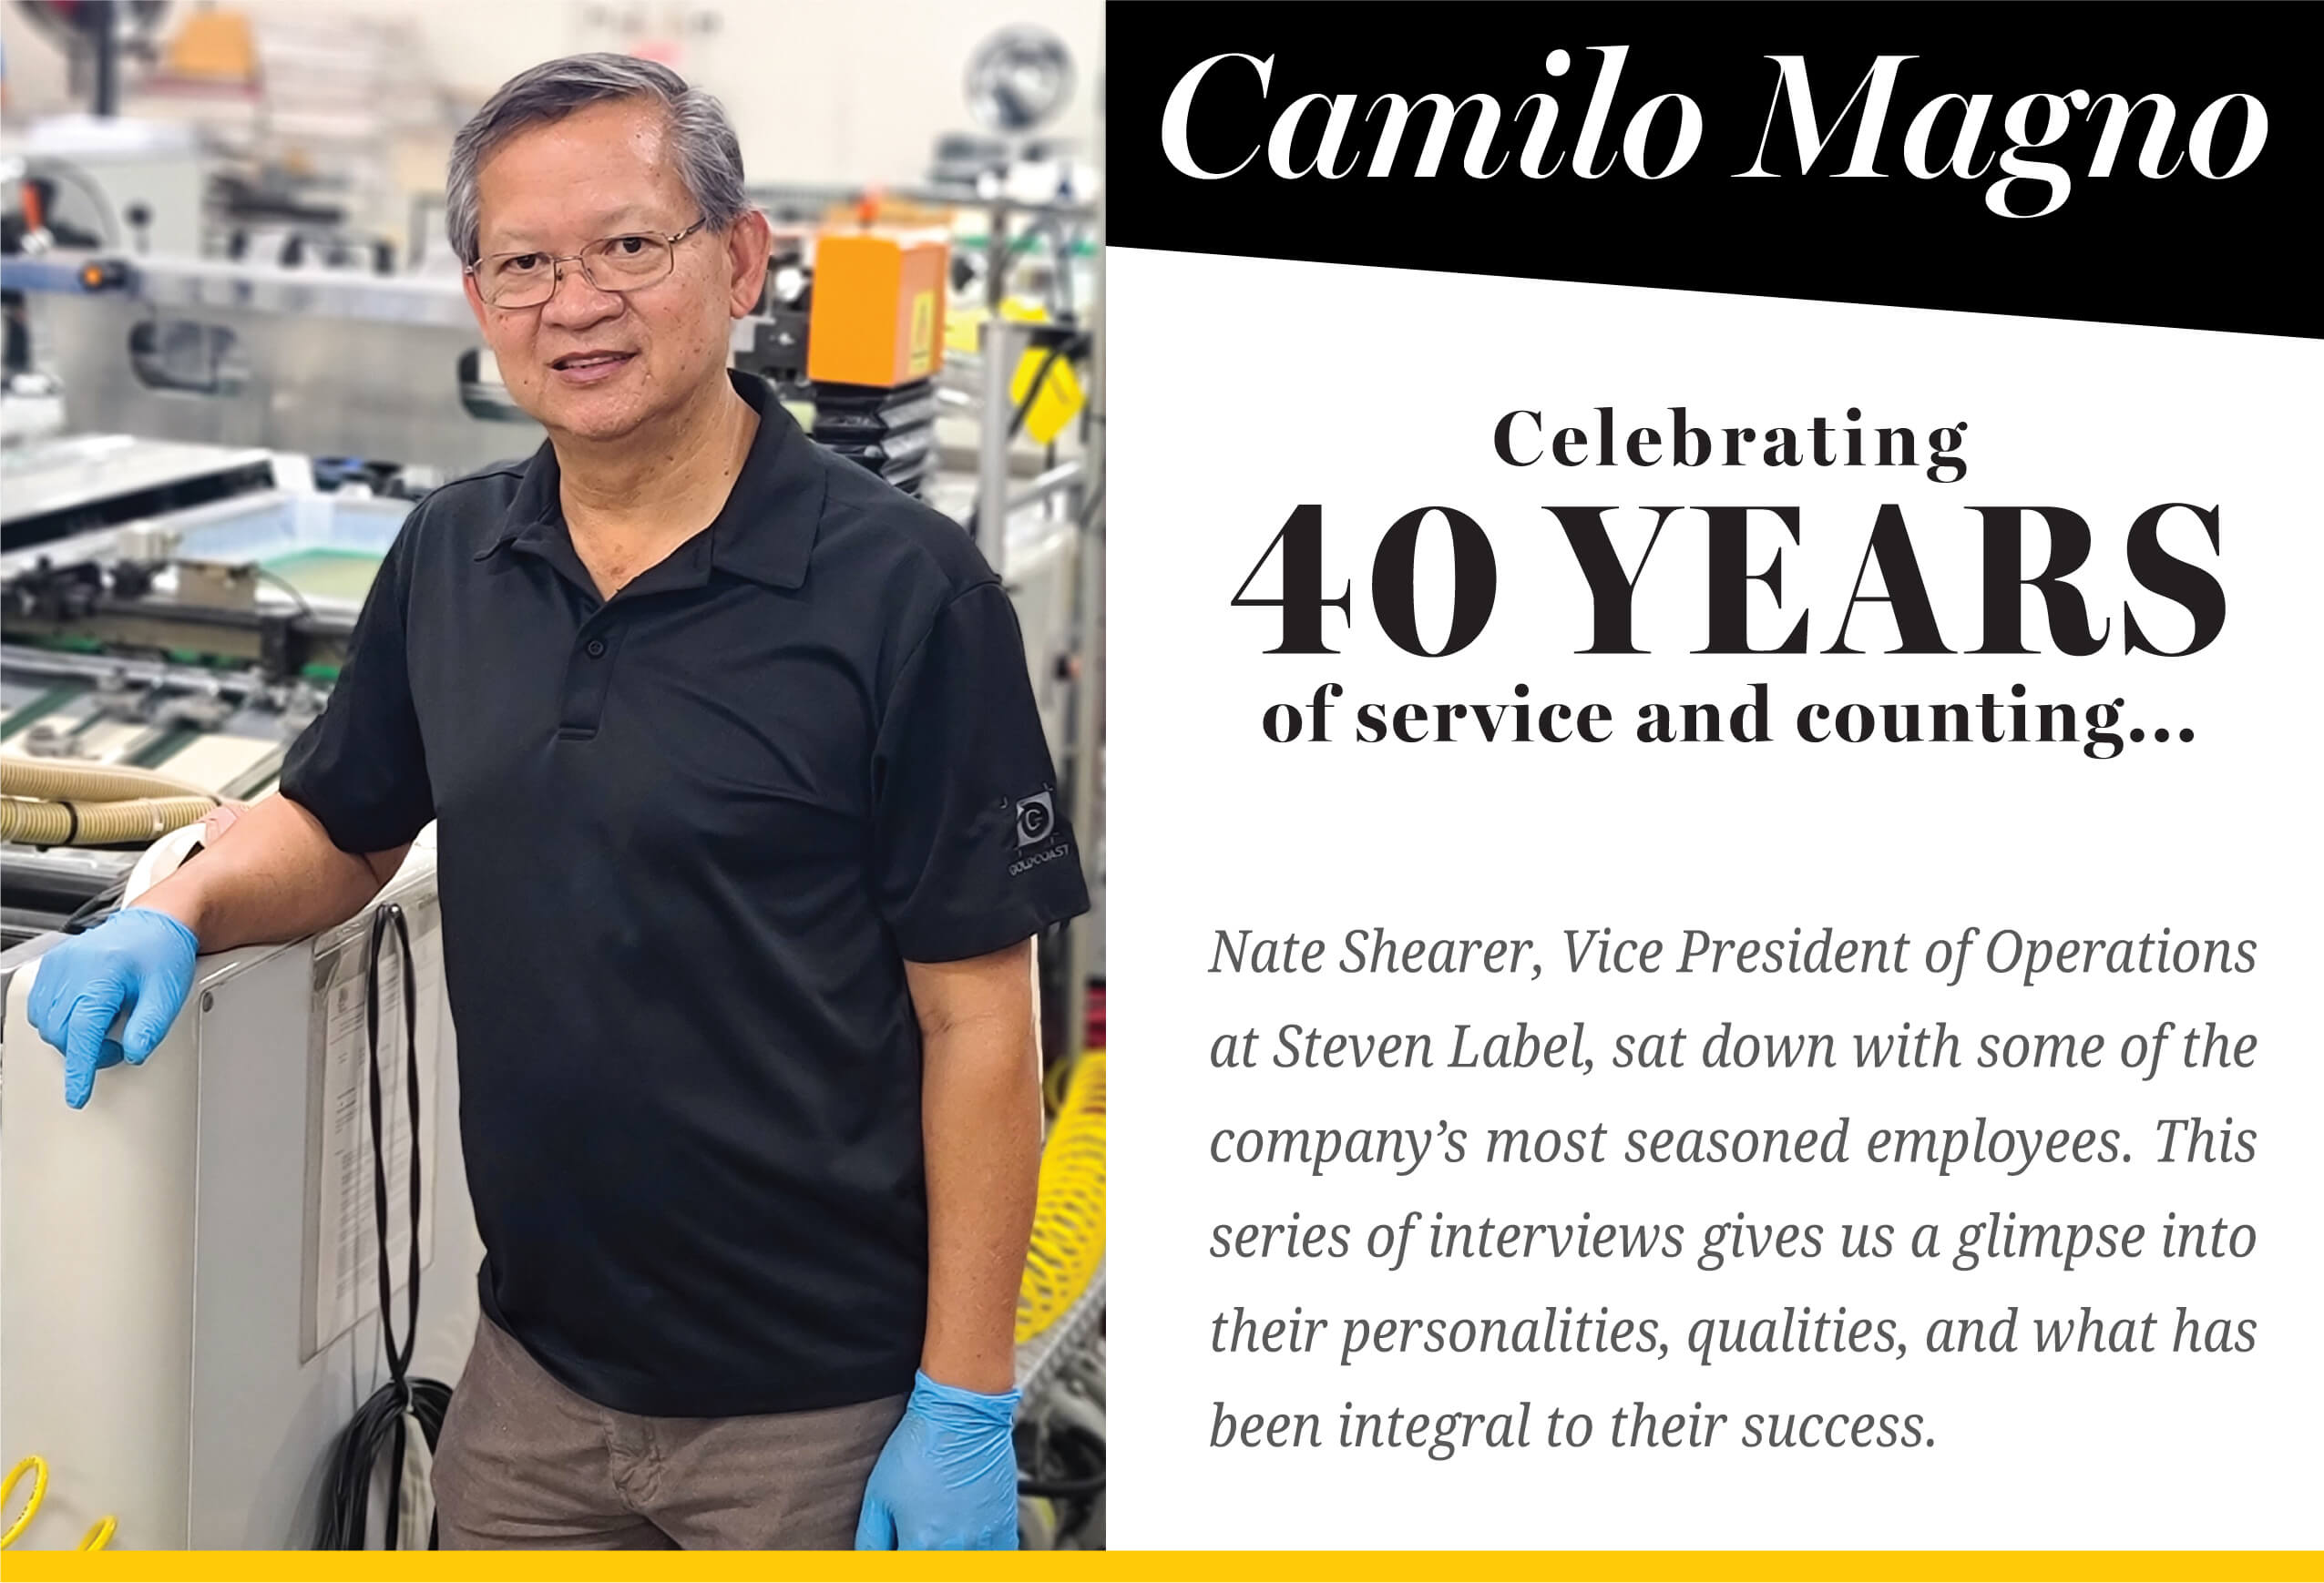 Camilo Magno — Forty Years of Expertise!